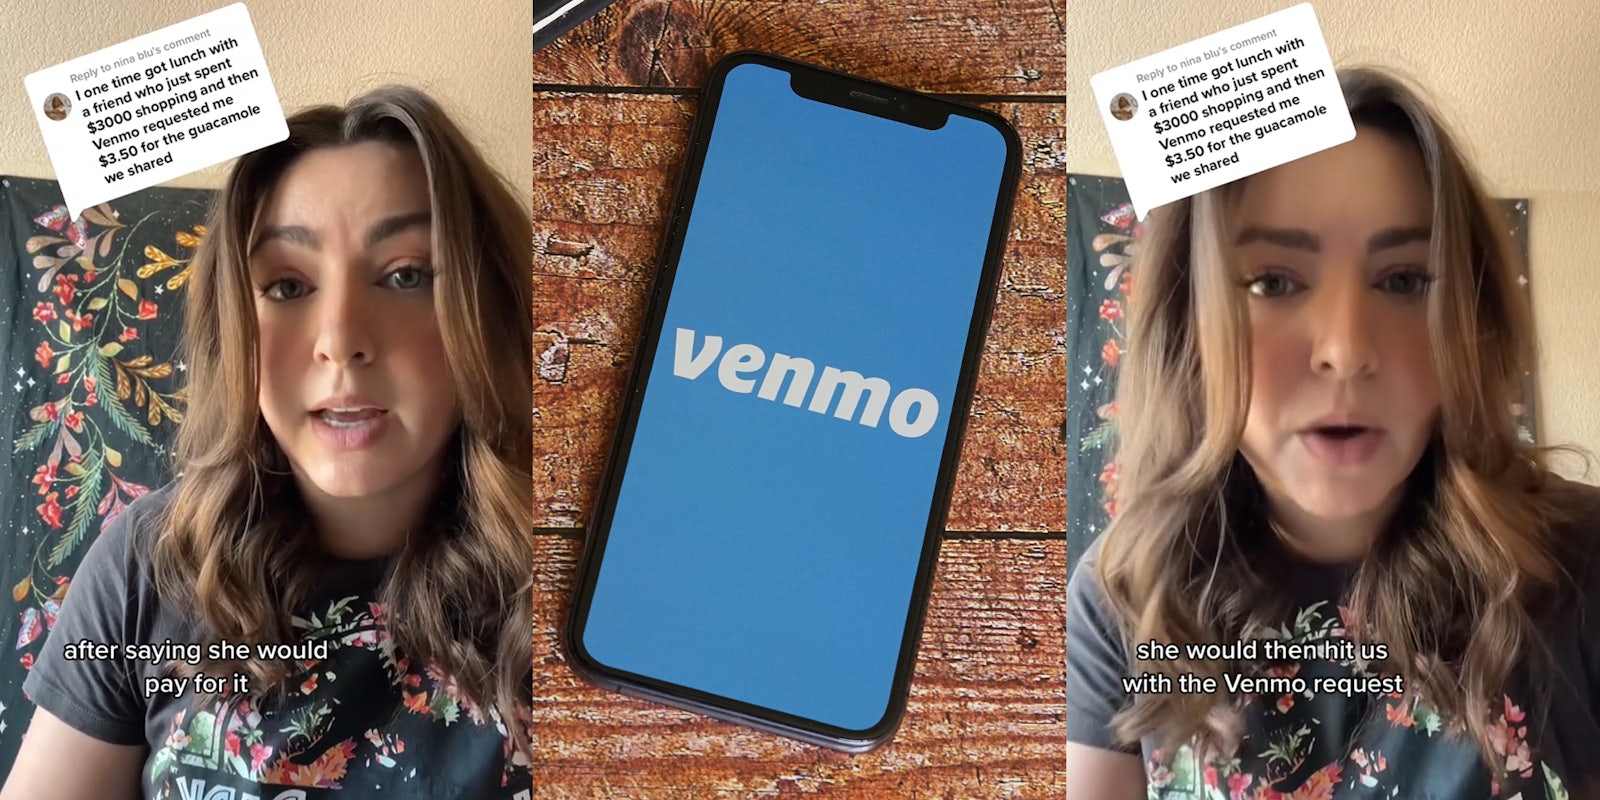 person speaking in front of tapestry with caption 'after saying she would pay for it' (l) Venmo on phone screen in front of wooden background (c) person speaking in front of tapestry with caption 'she would then hit us with the Venmo request' (r)